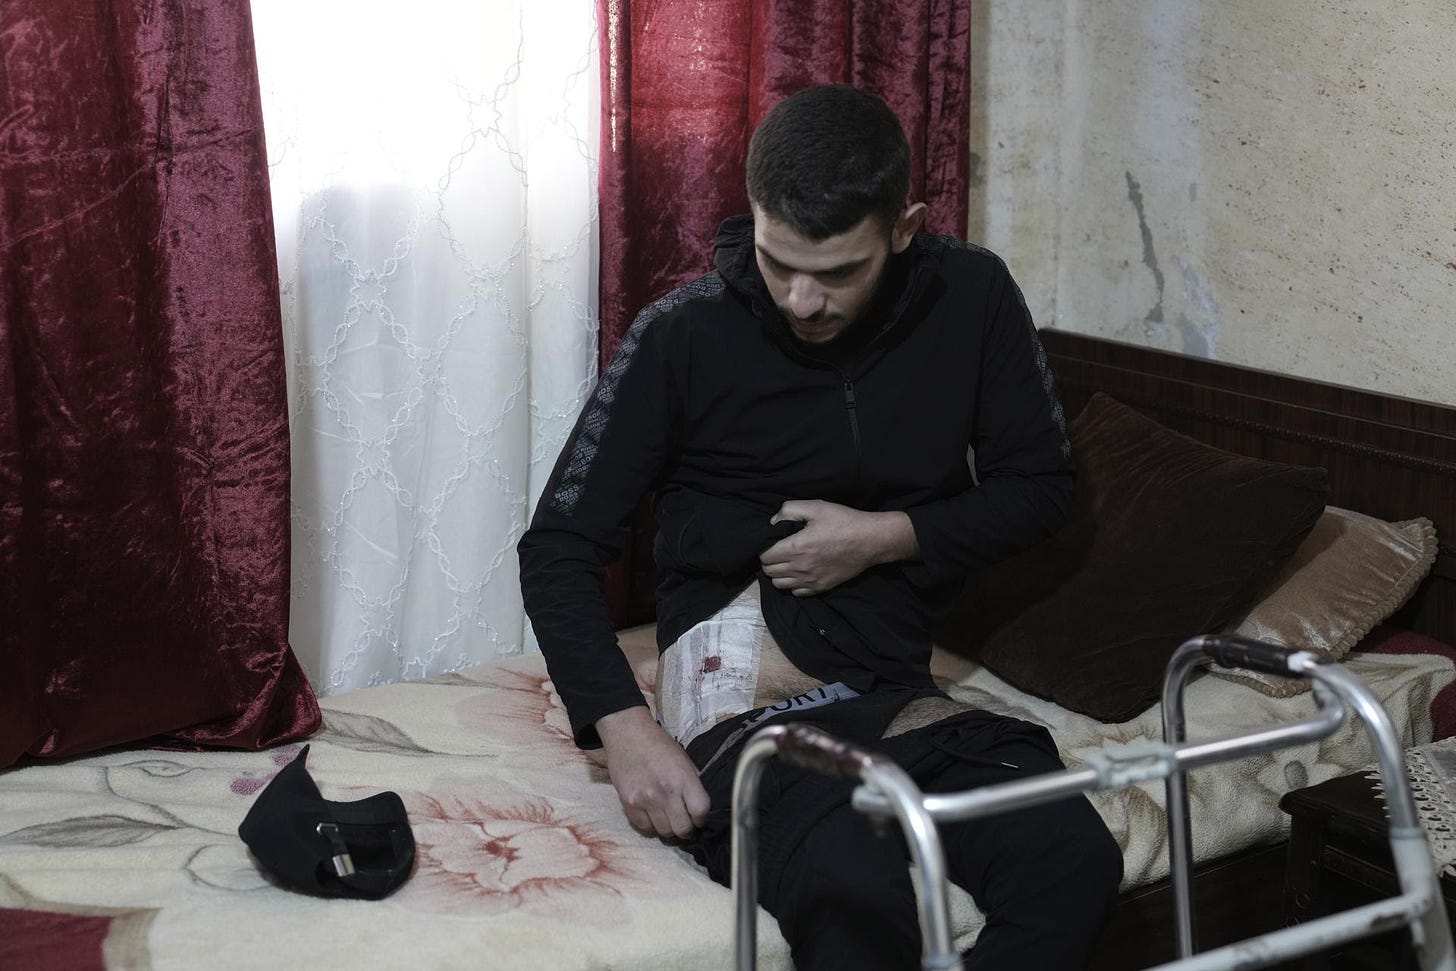 Mohammed Rimawi shows his injury from an Israeli military shooting.